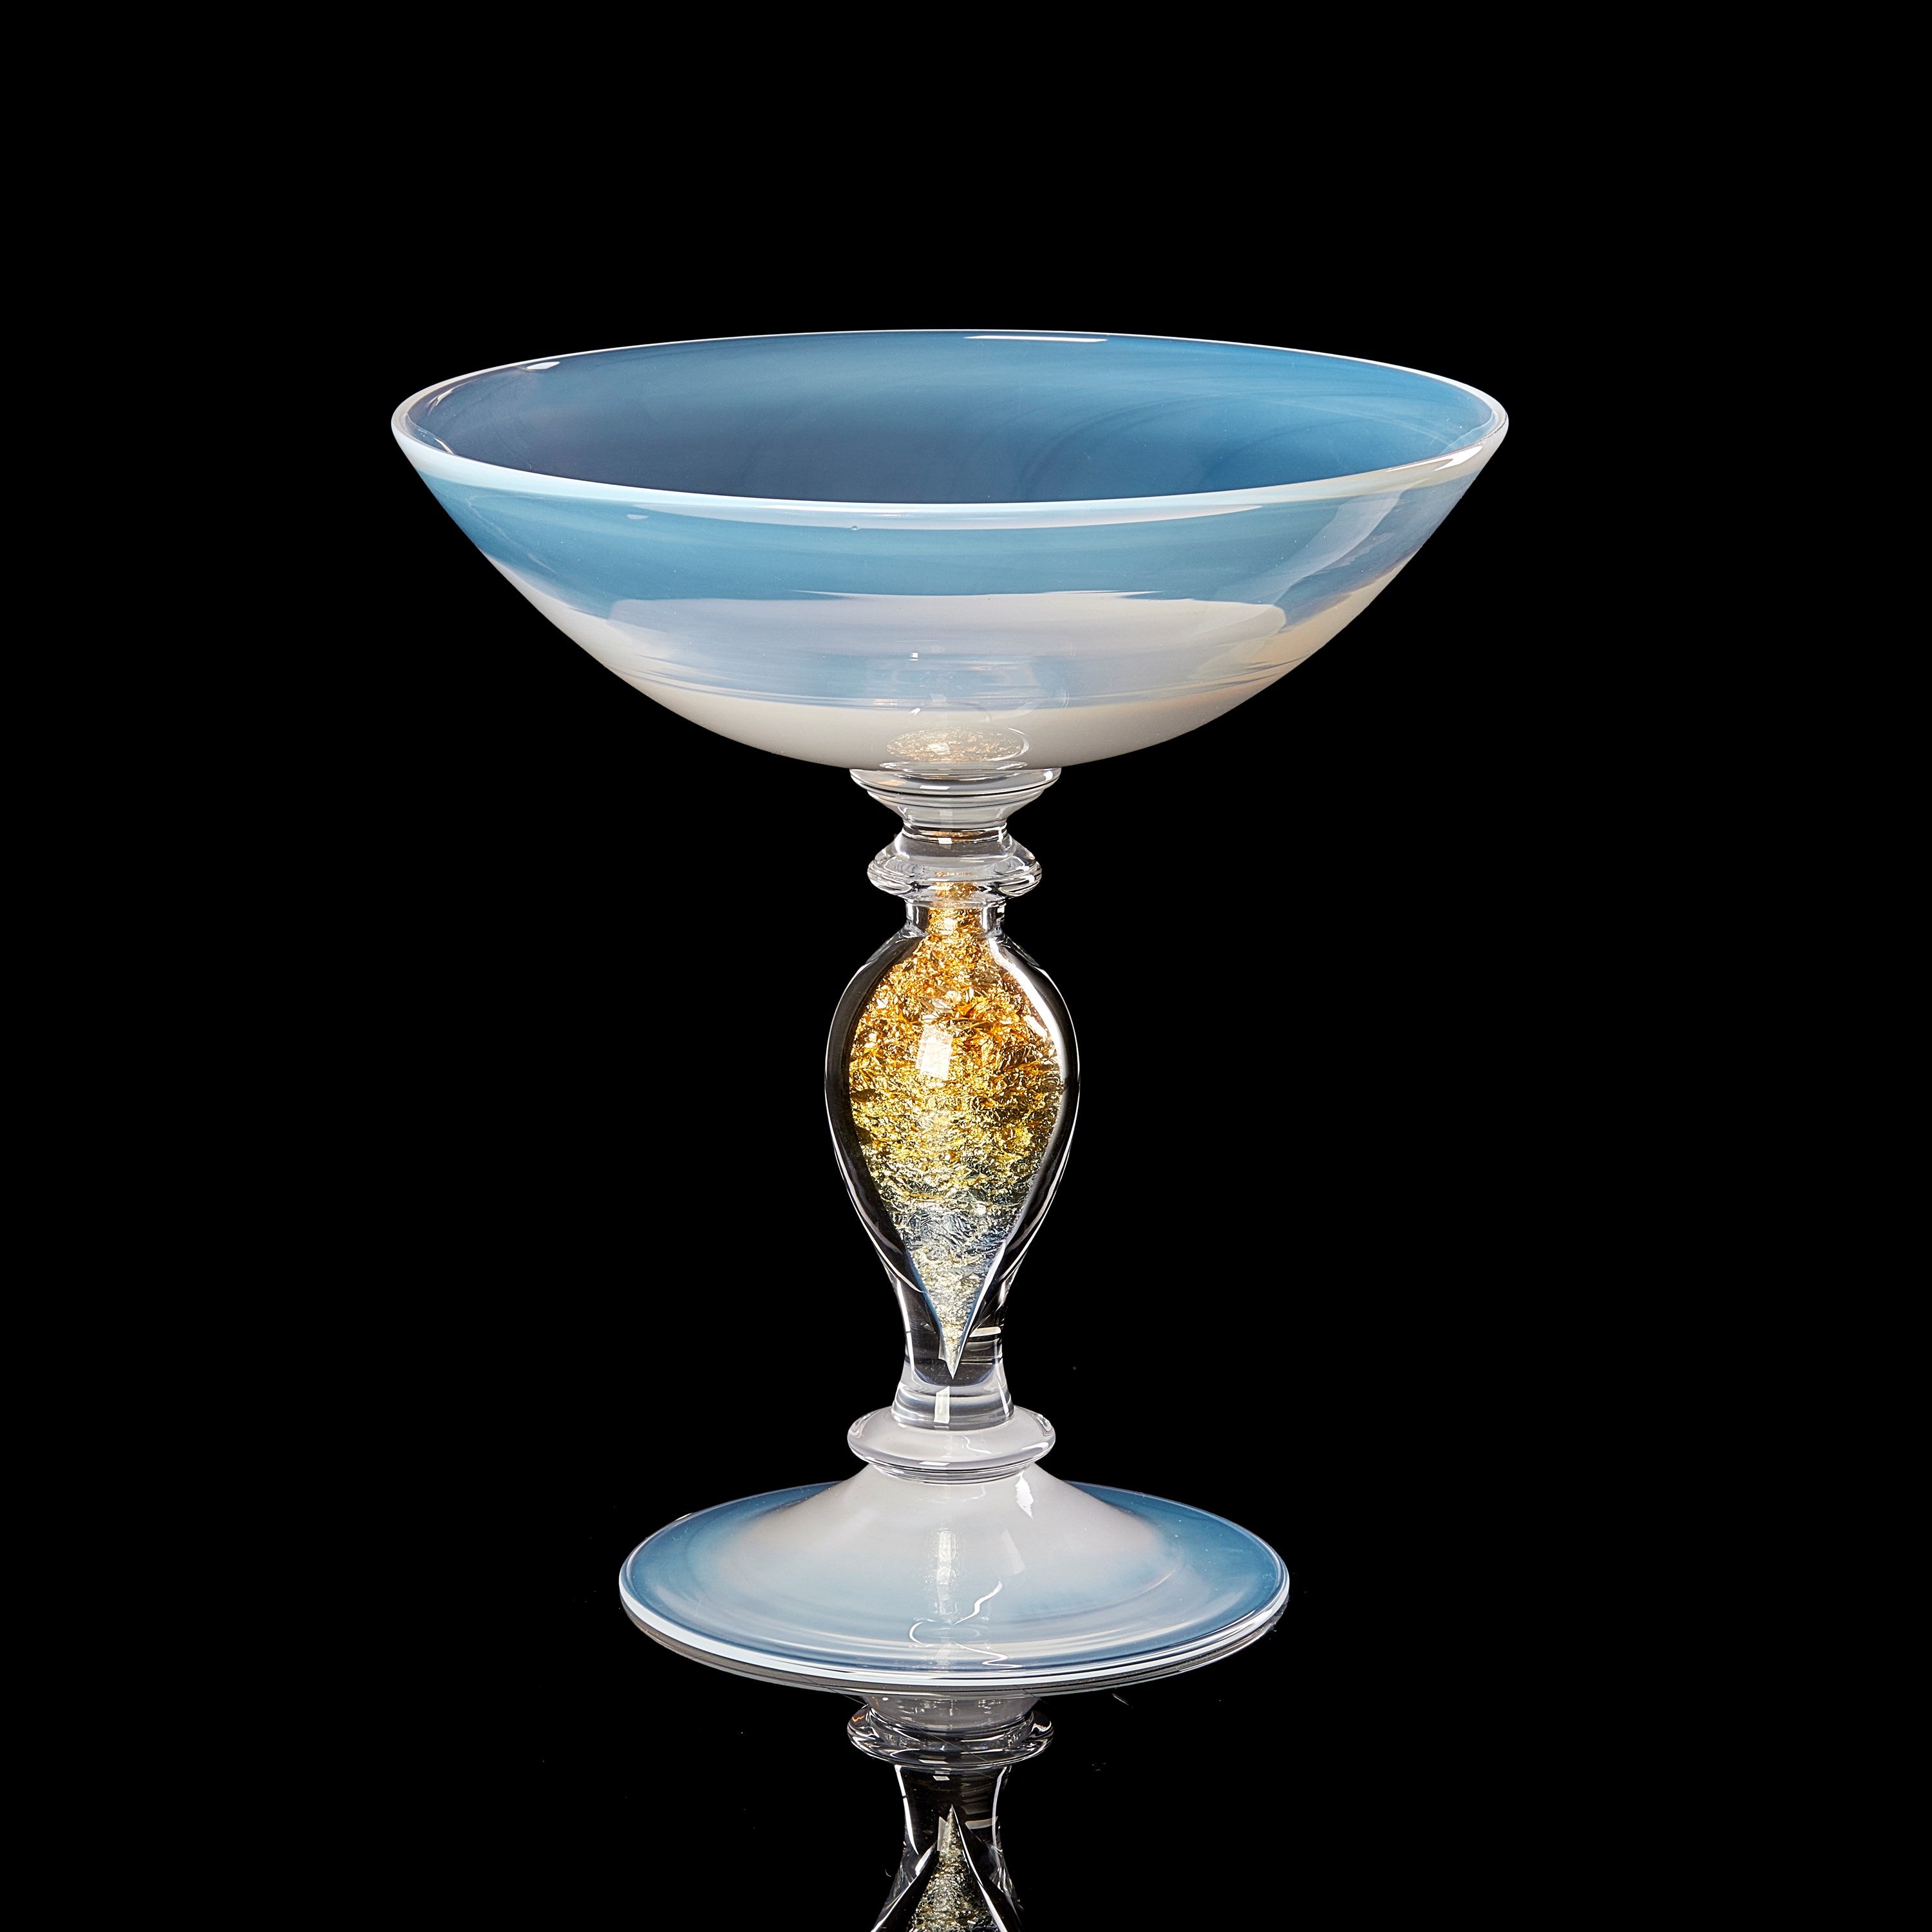 British Gambo d’Oro, a milky white glass & gold leaf centrepiece by Anthony Scala For Sale